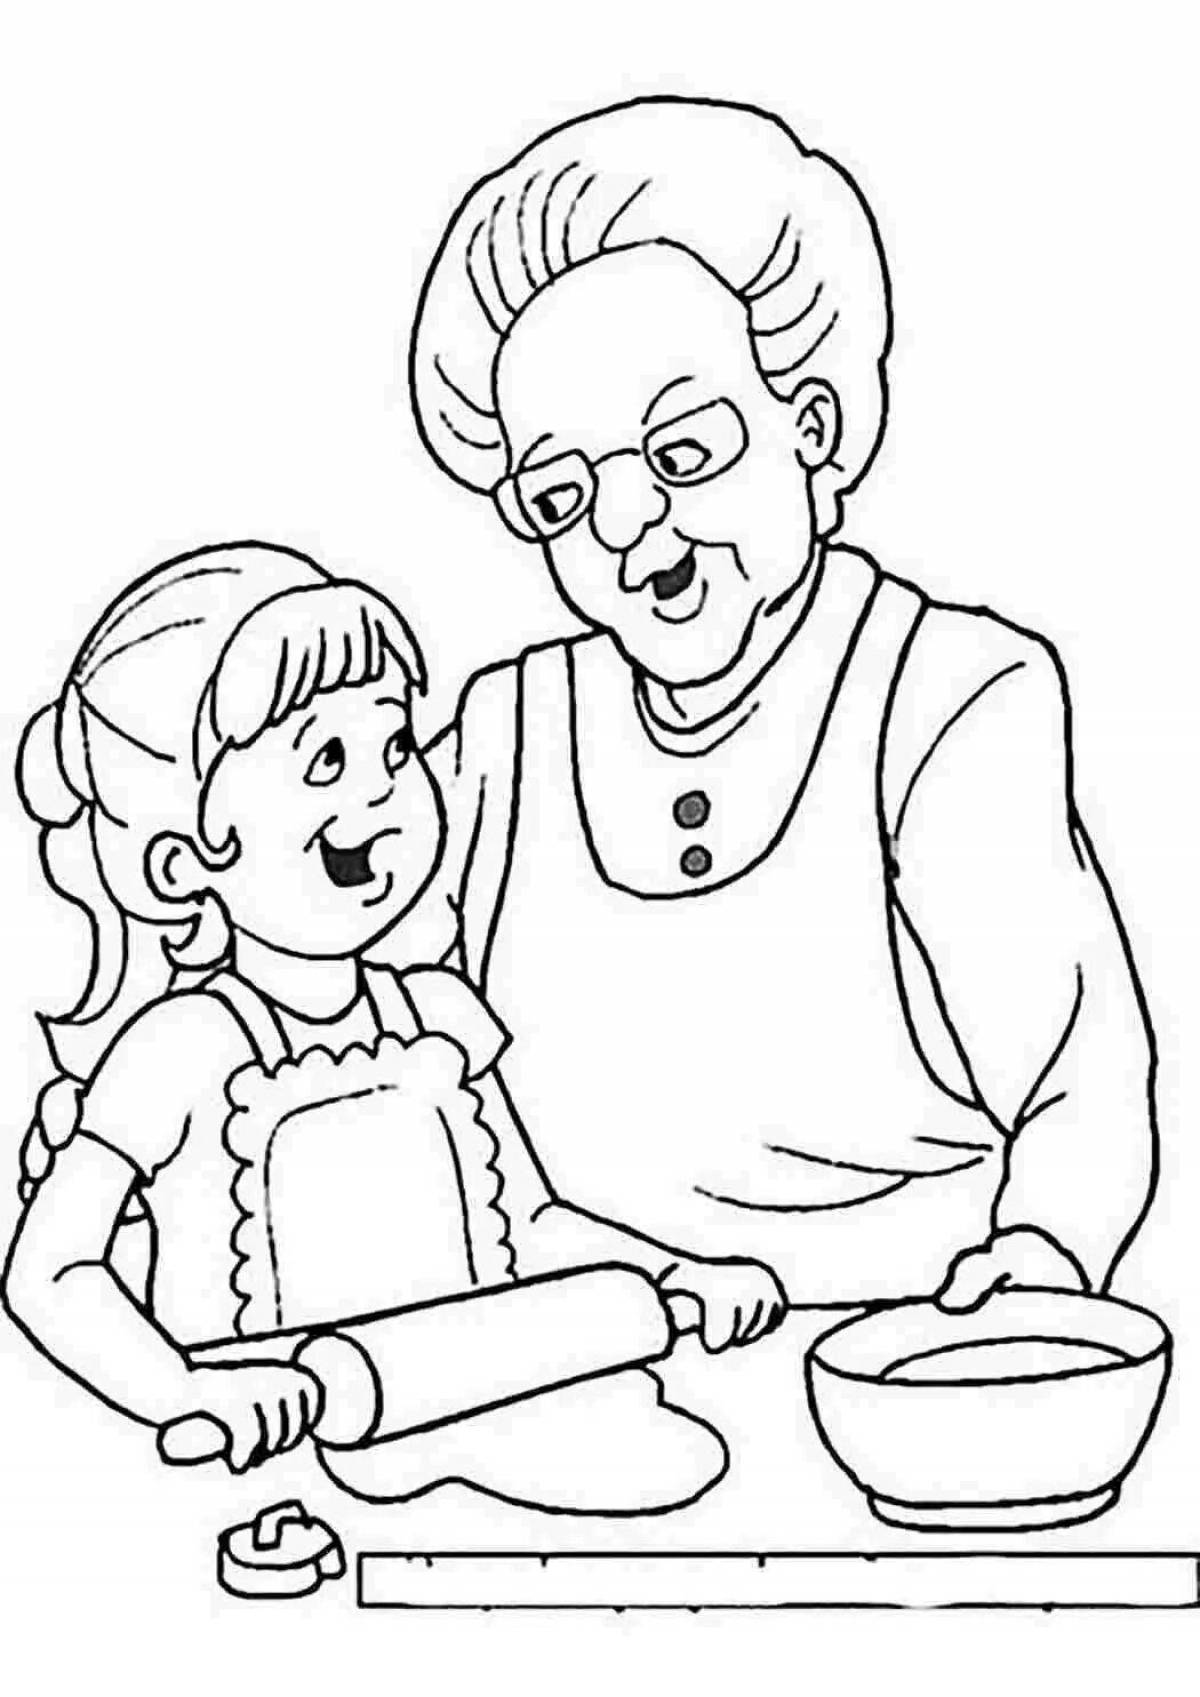 Colorful grandparents coloring page